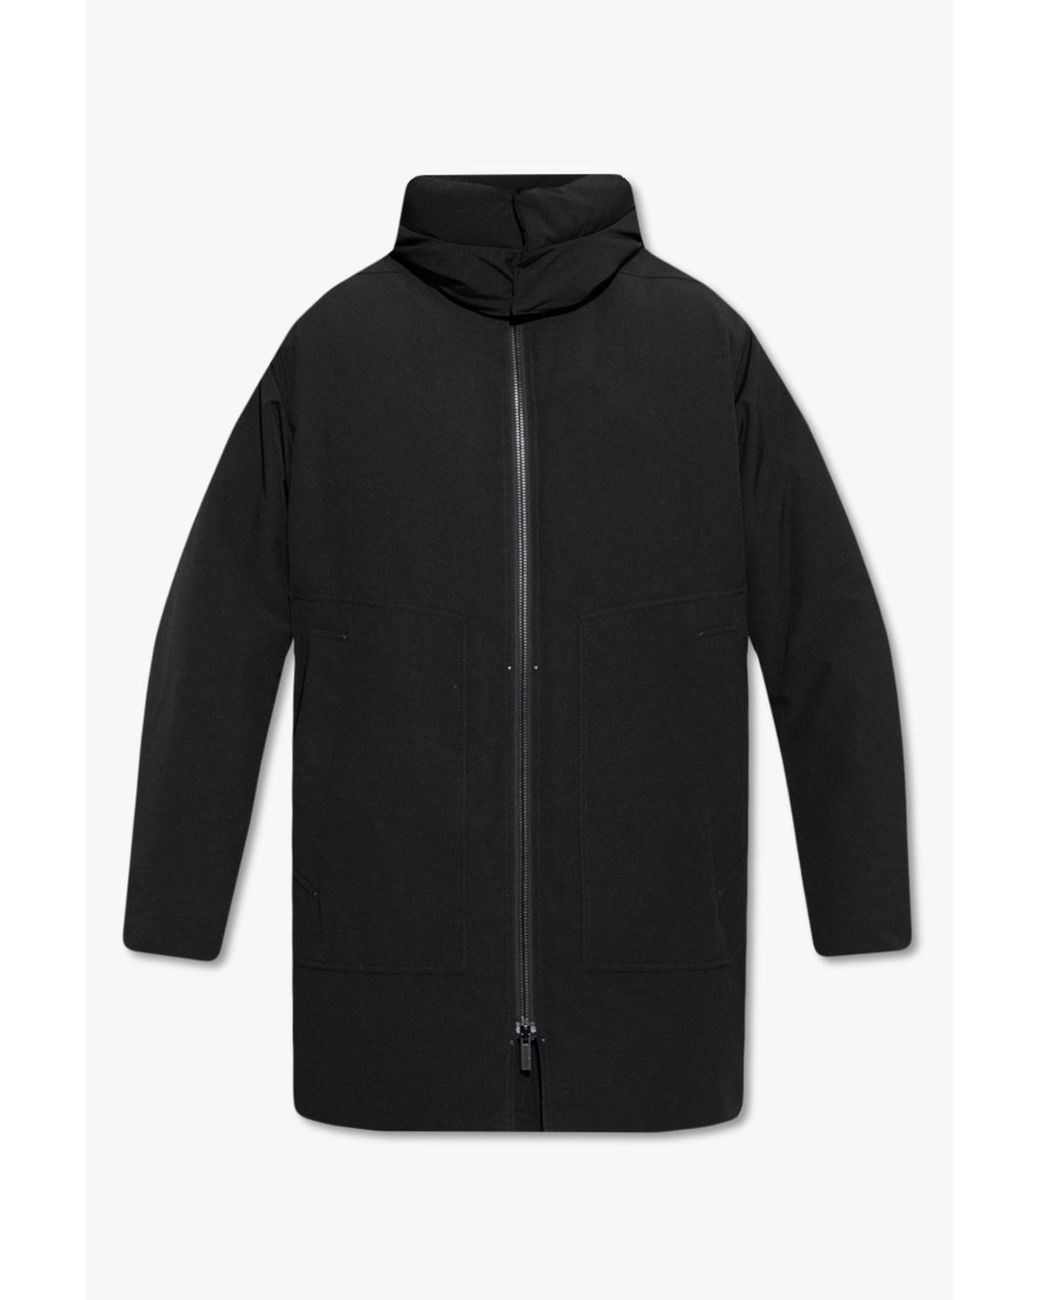 Moncler 'oshima' Long Down Jacket in Black for Men | Lyst Canada